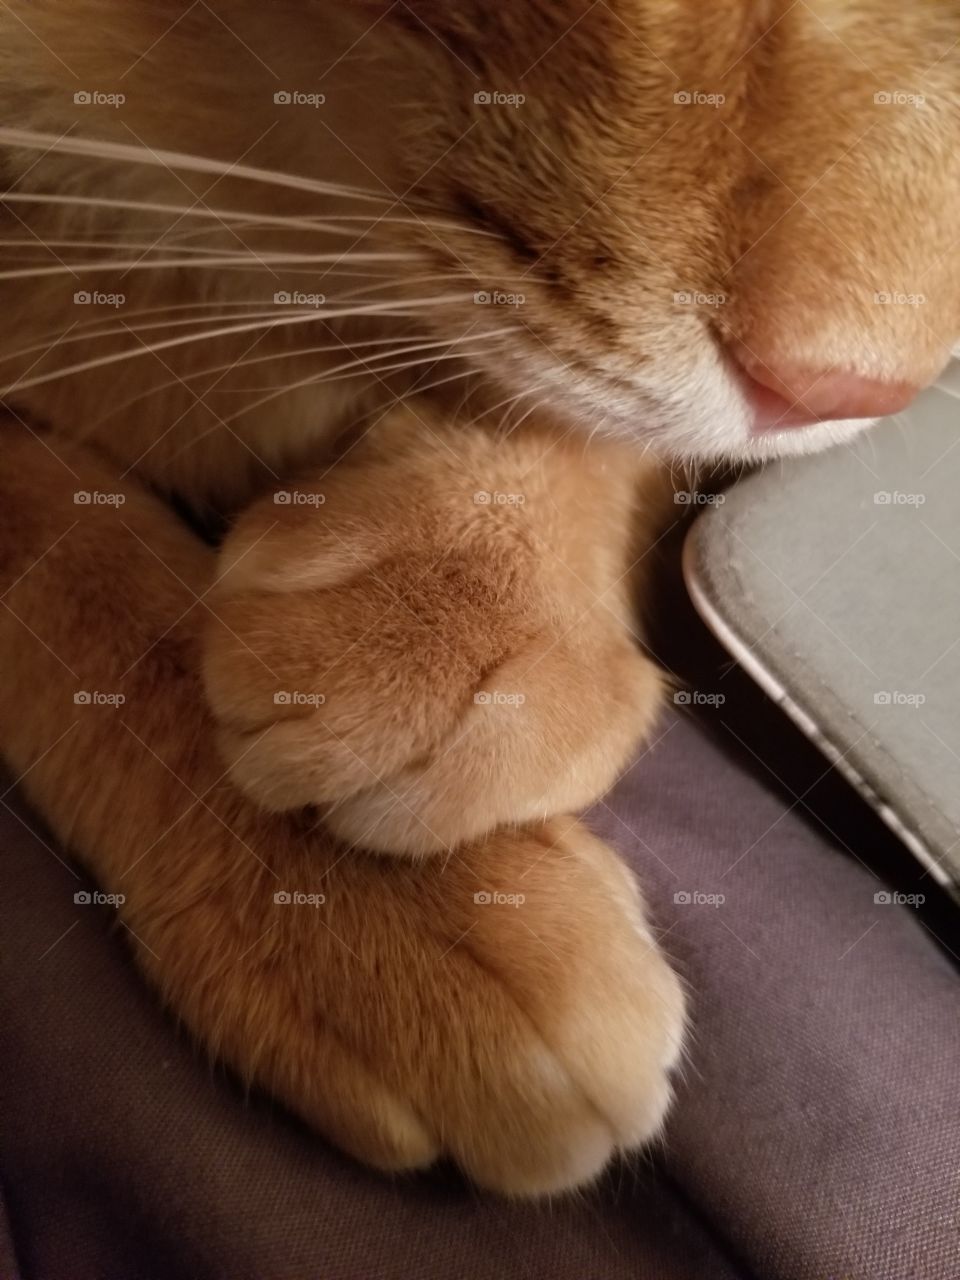 he paws